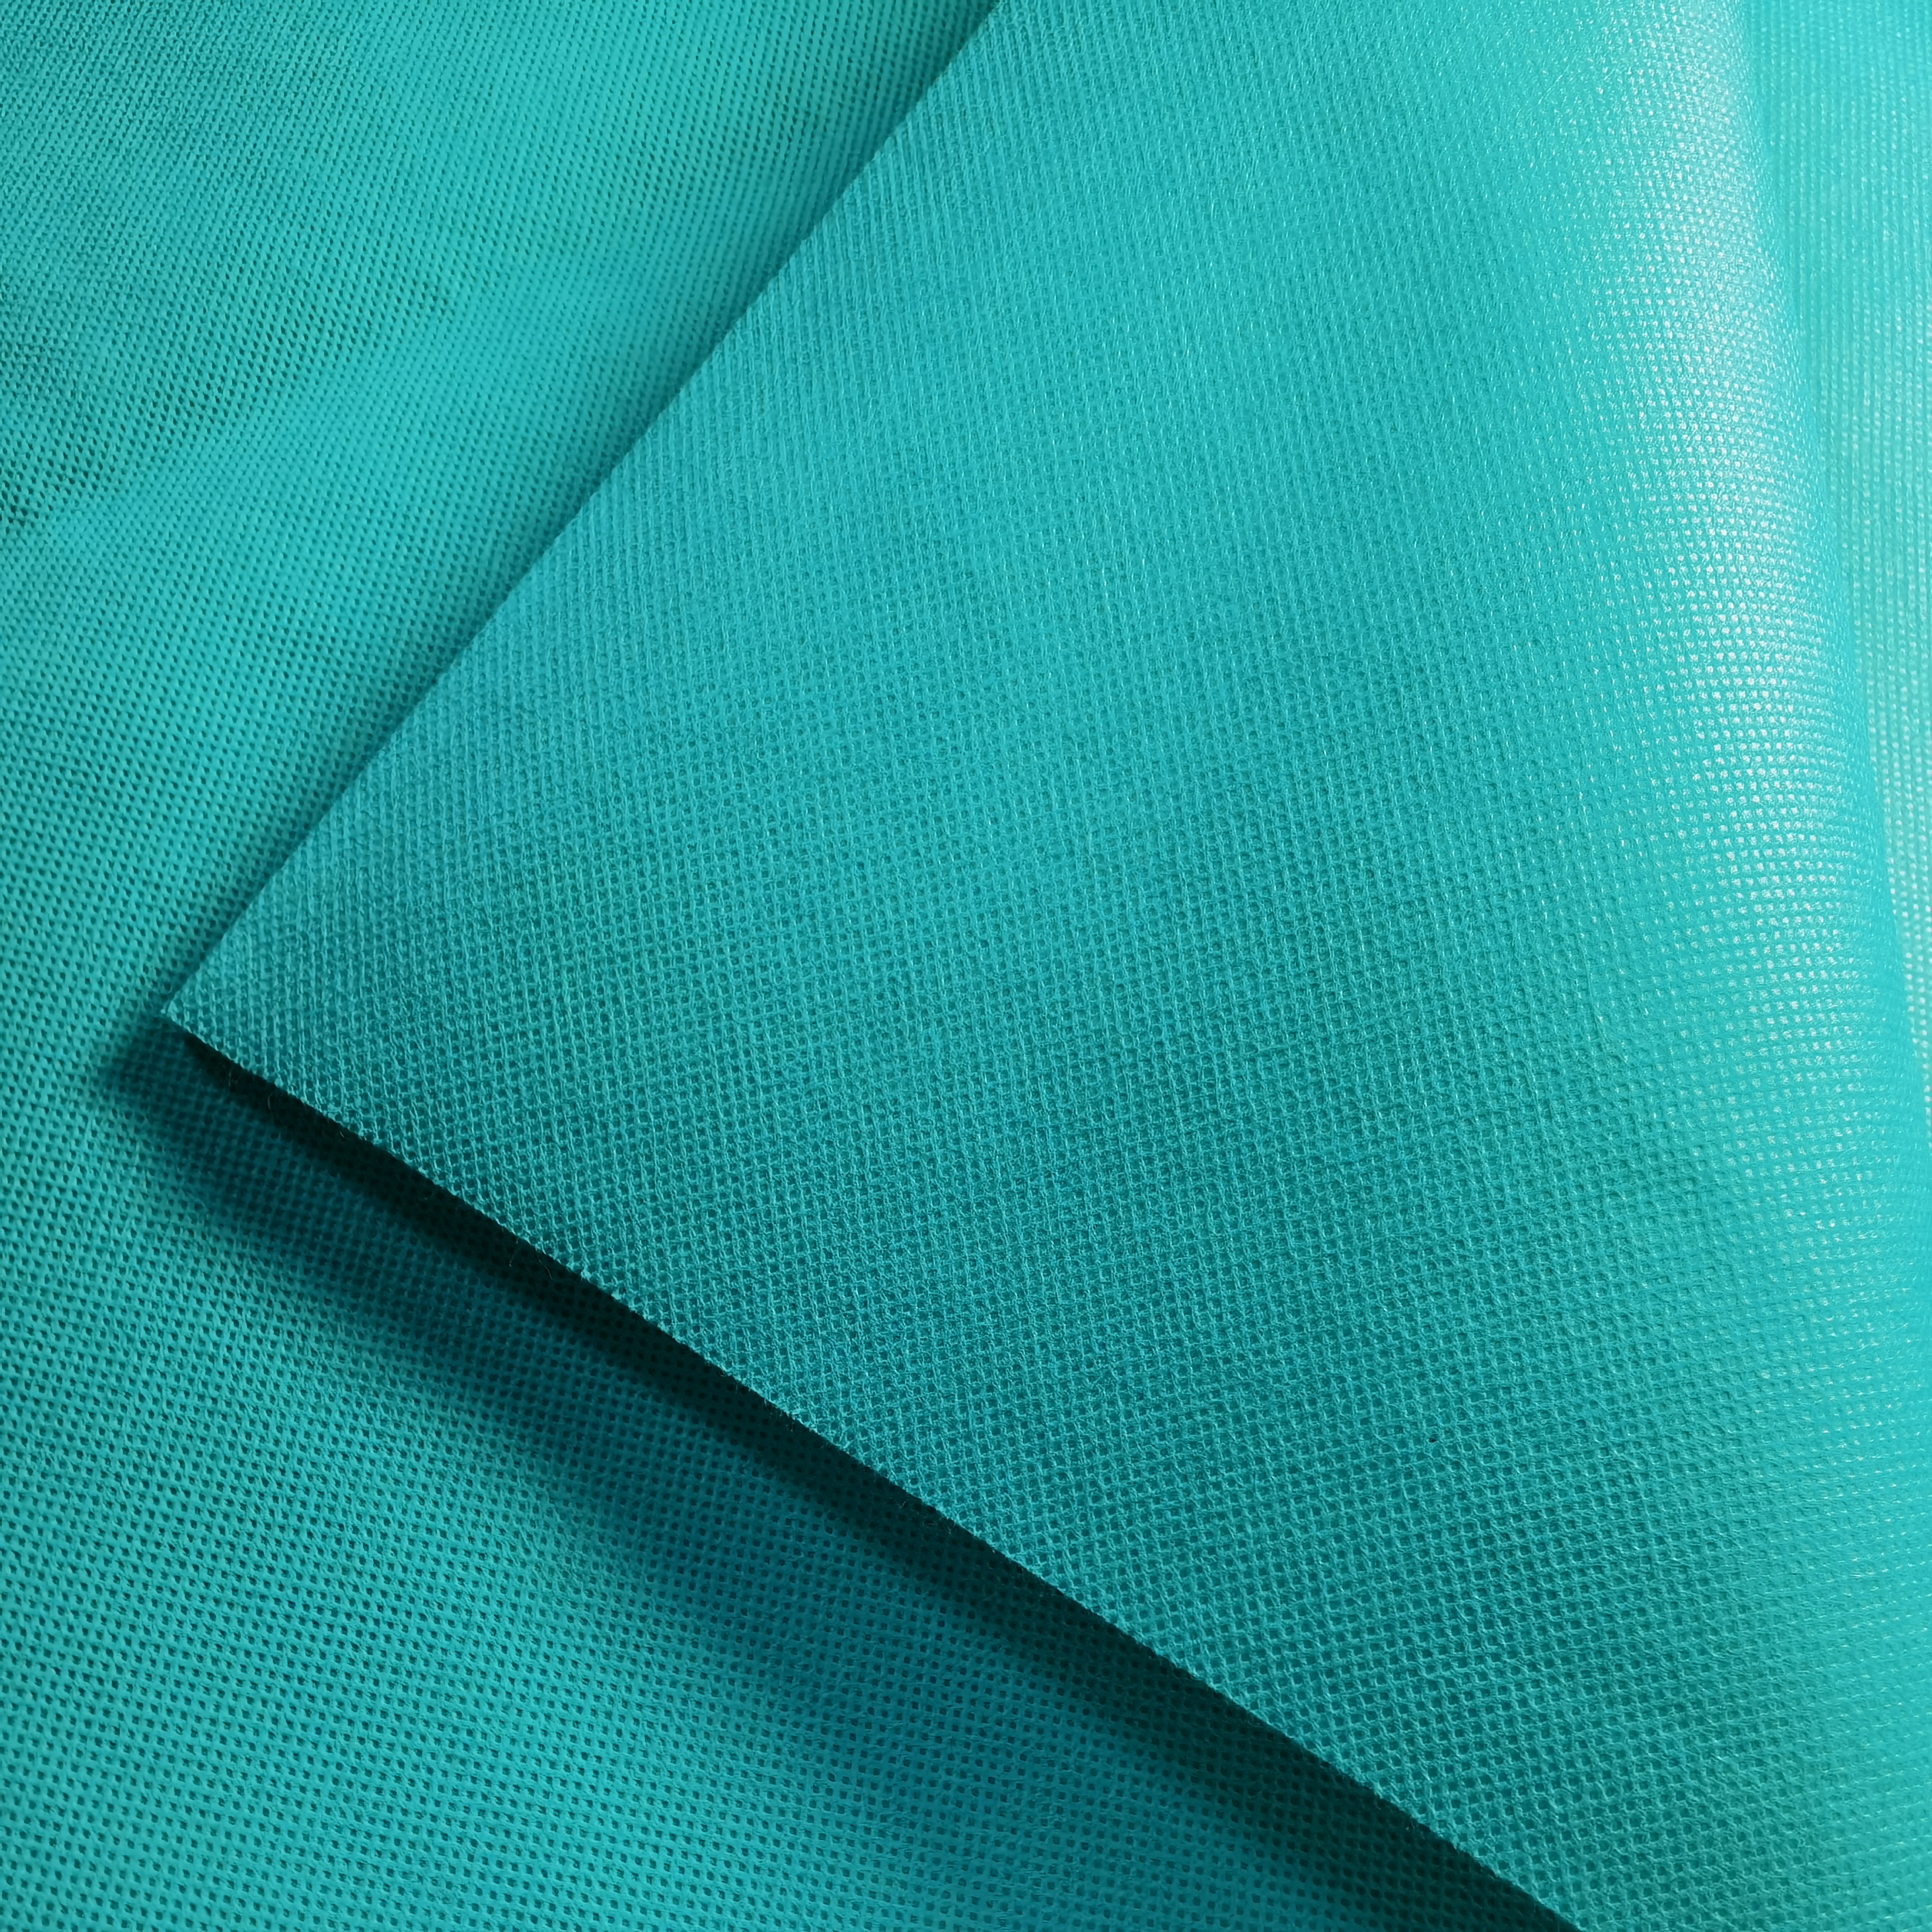 Global PP Nonwoven Fabric Industry Landscape Report 2021-2028